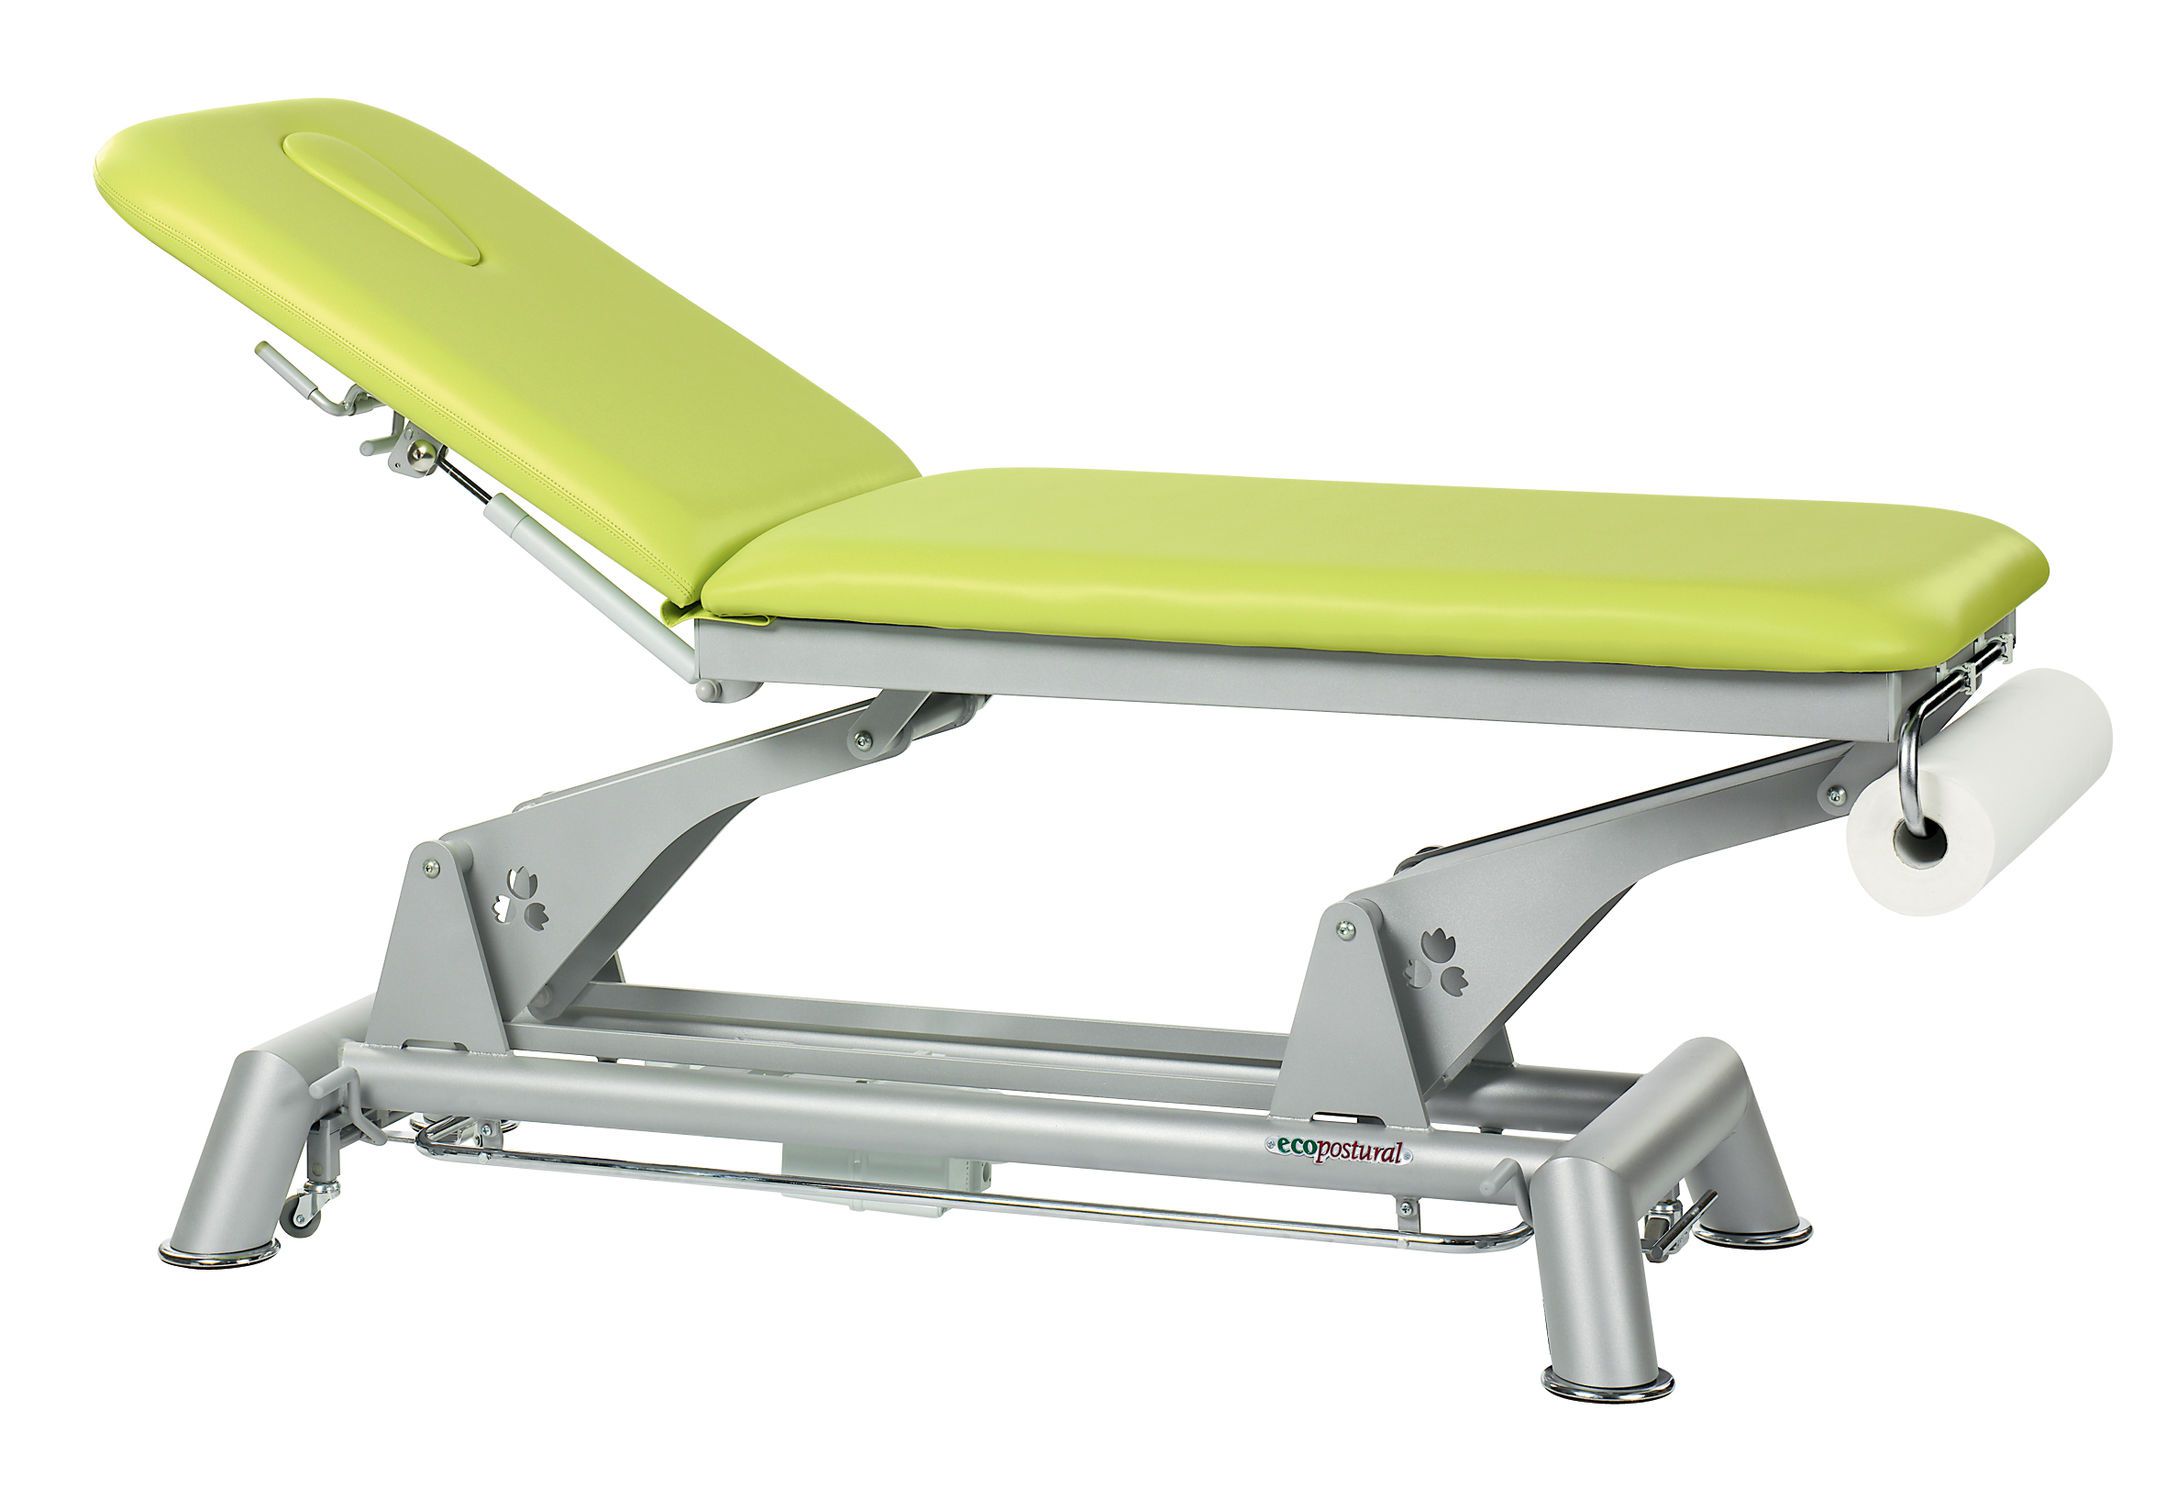 Electrical examination table / height-adjustable / on casters / 2-section C-5033-M44 Ecopostural